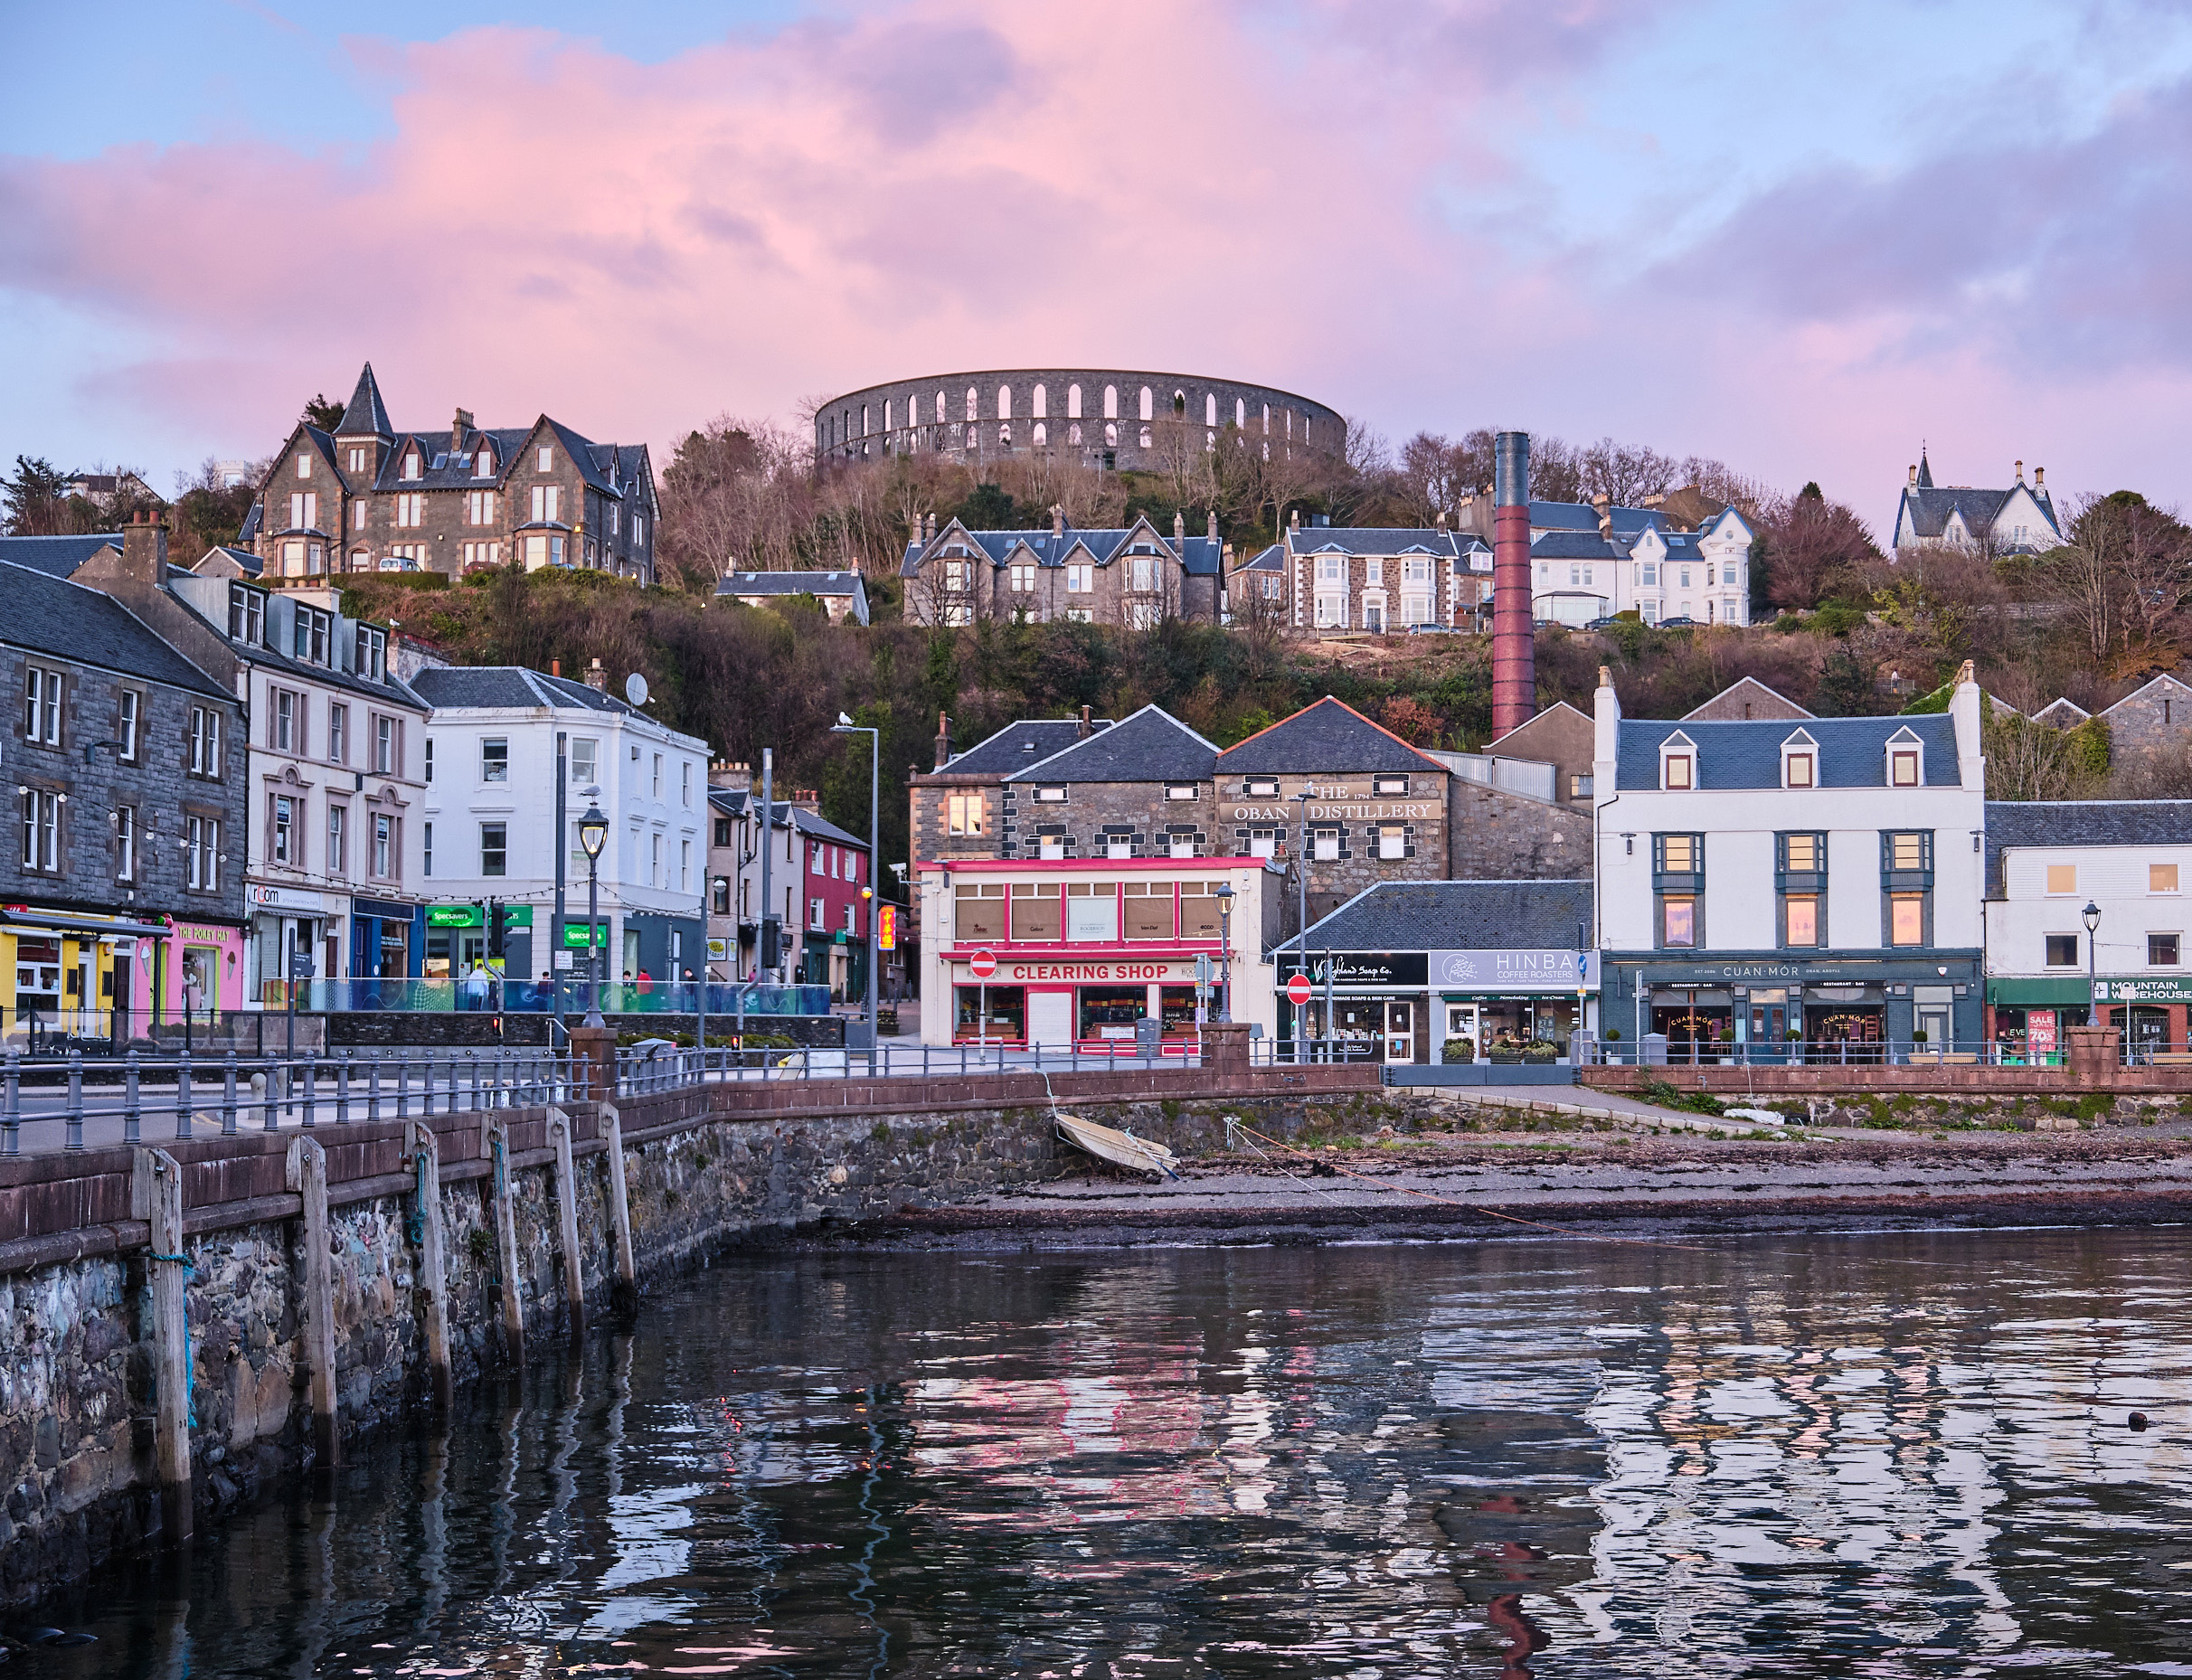 Oban Single Malt Scotch Whisky is dispatching Postcards from Oban to remind you this warm, welcoming coastal town is eagerly awaiting your return.